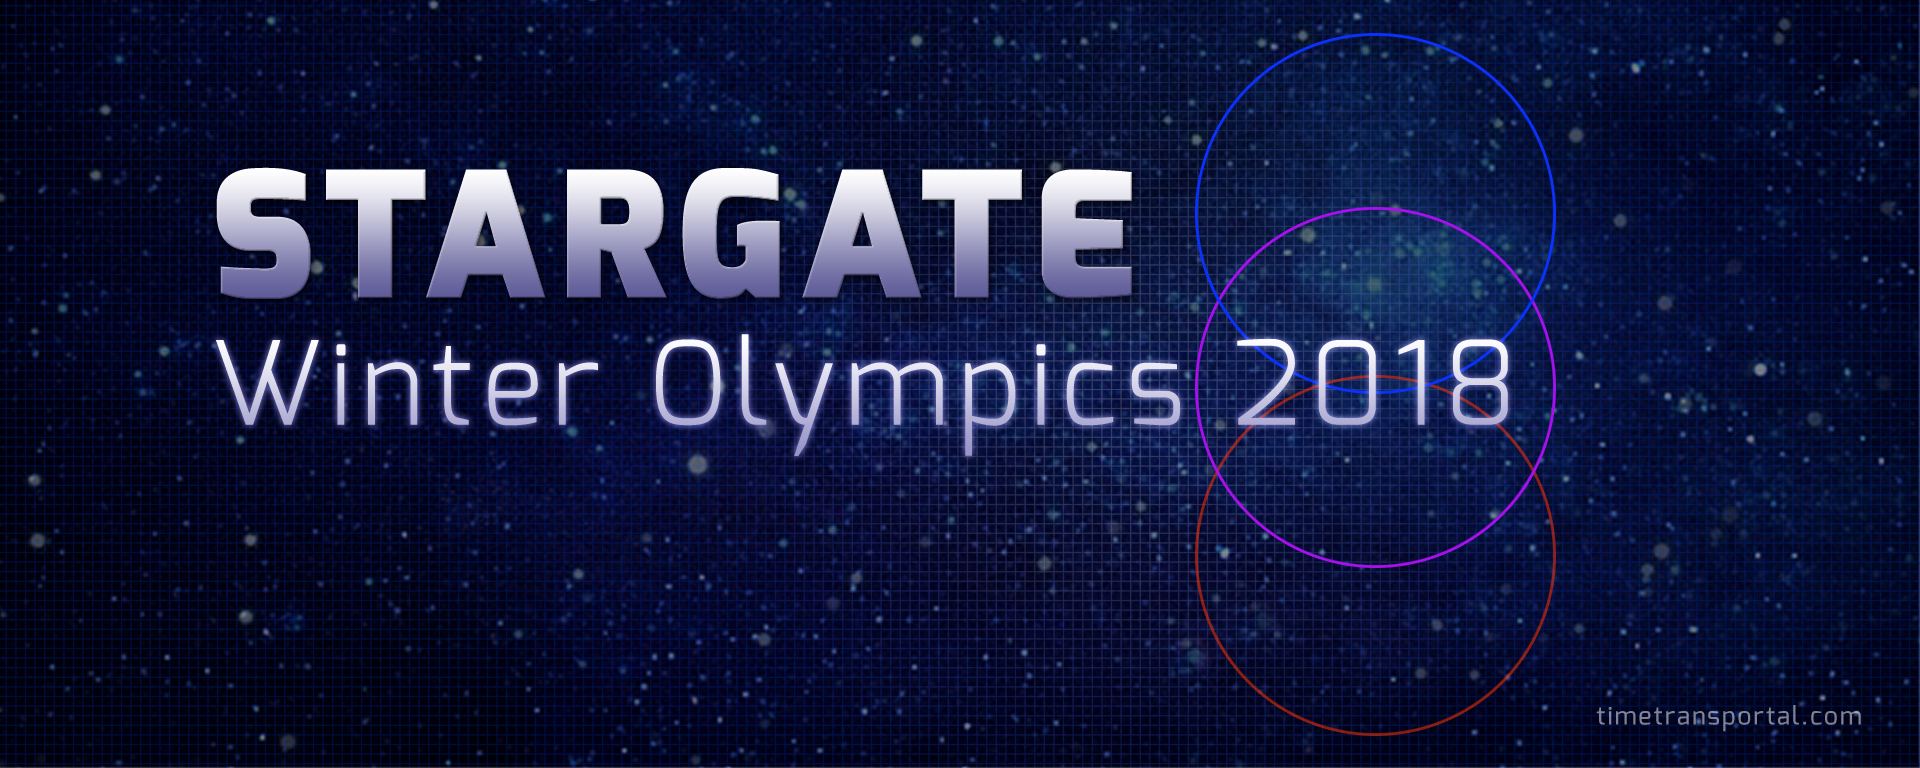 Stargate at the Winter Olympics 2018